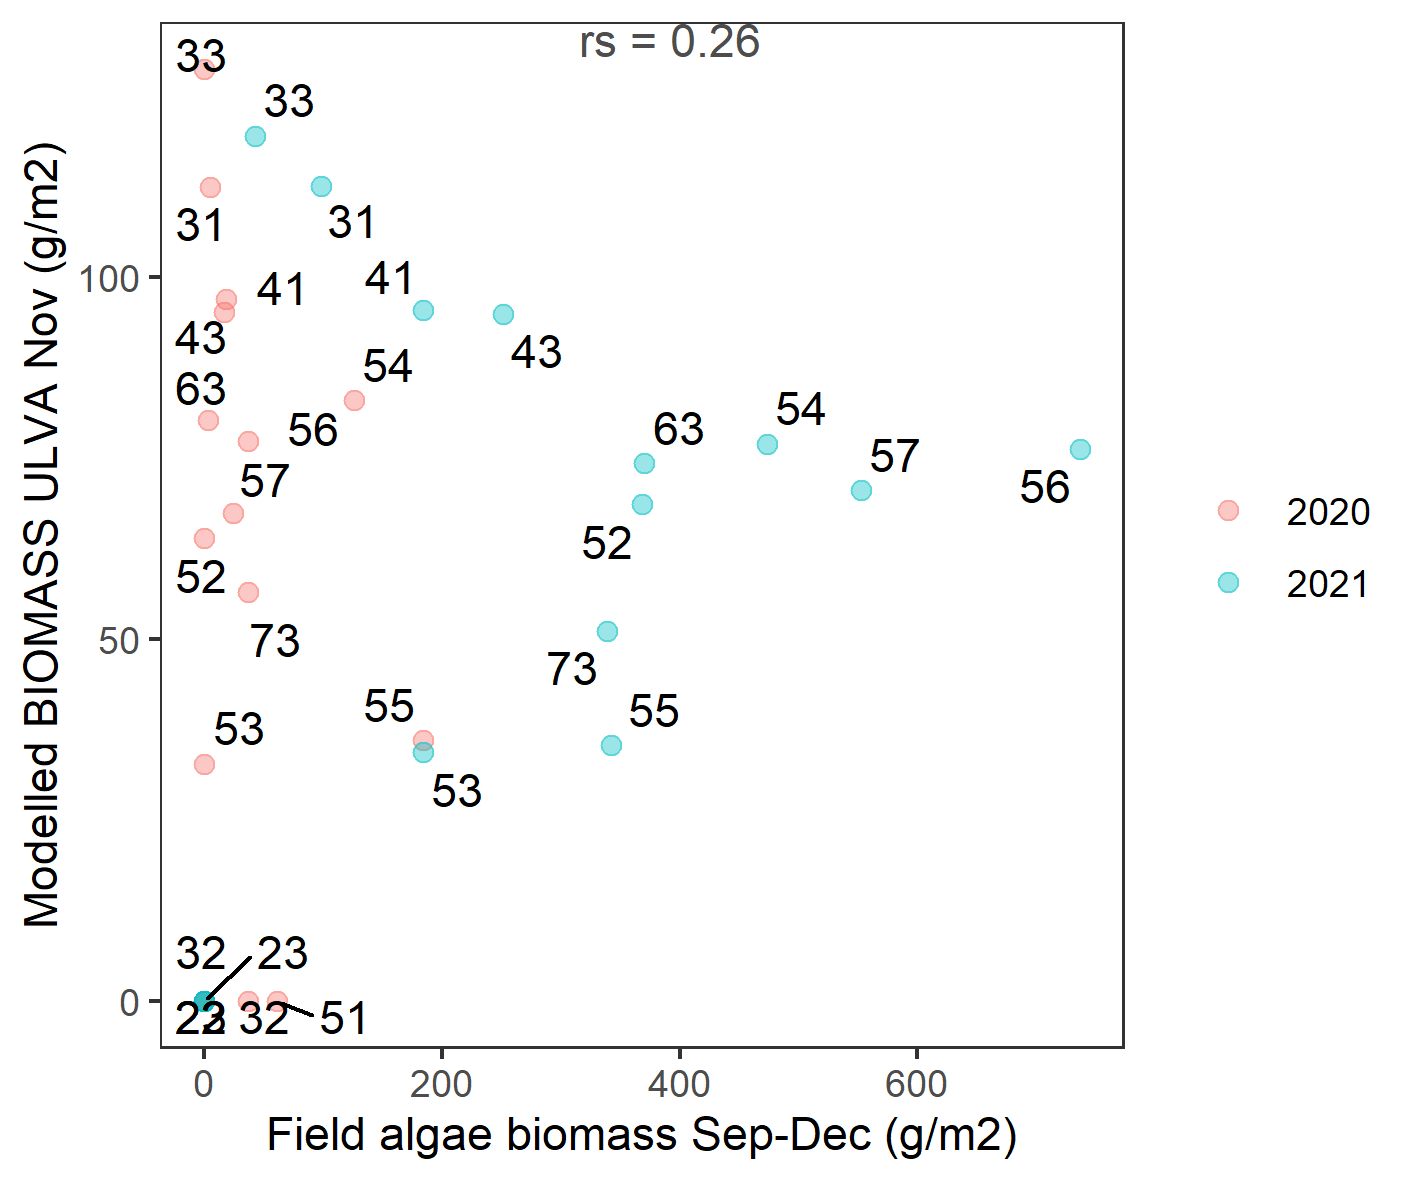 Scatter plot of field estimated macroalgae biomass versus simulated Ulva biomass for 2020 - 2021 averaged by zones in the lagoon. Labels indicate zone number (see Figure 2.5 for details). rs: Spearman's rank correlation coefficient.